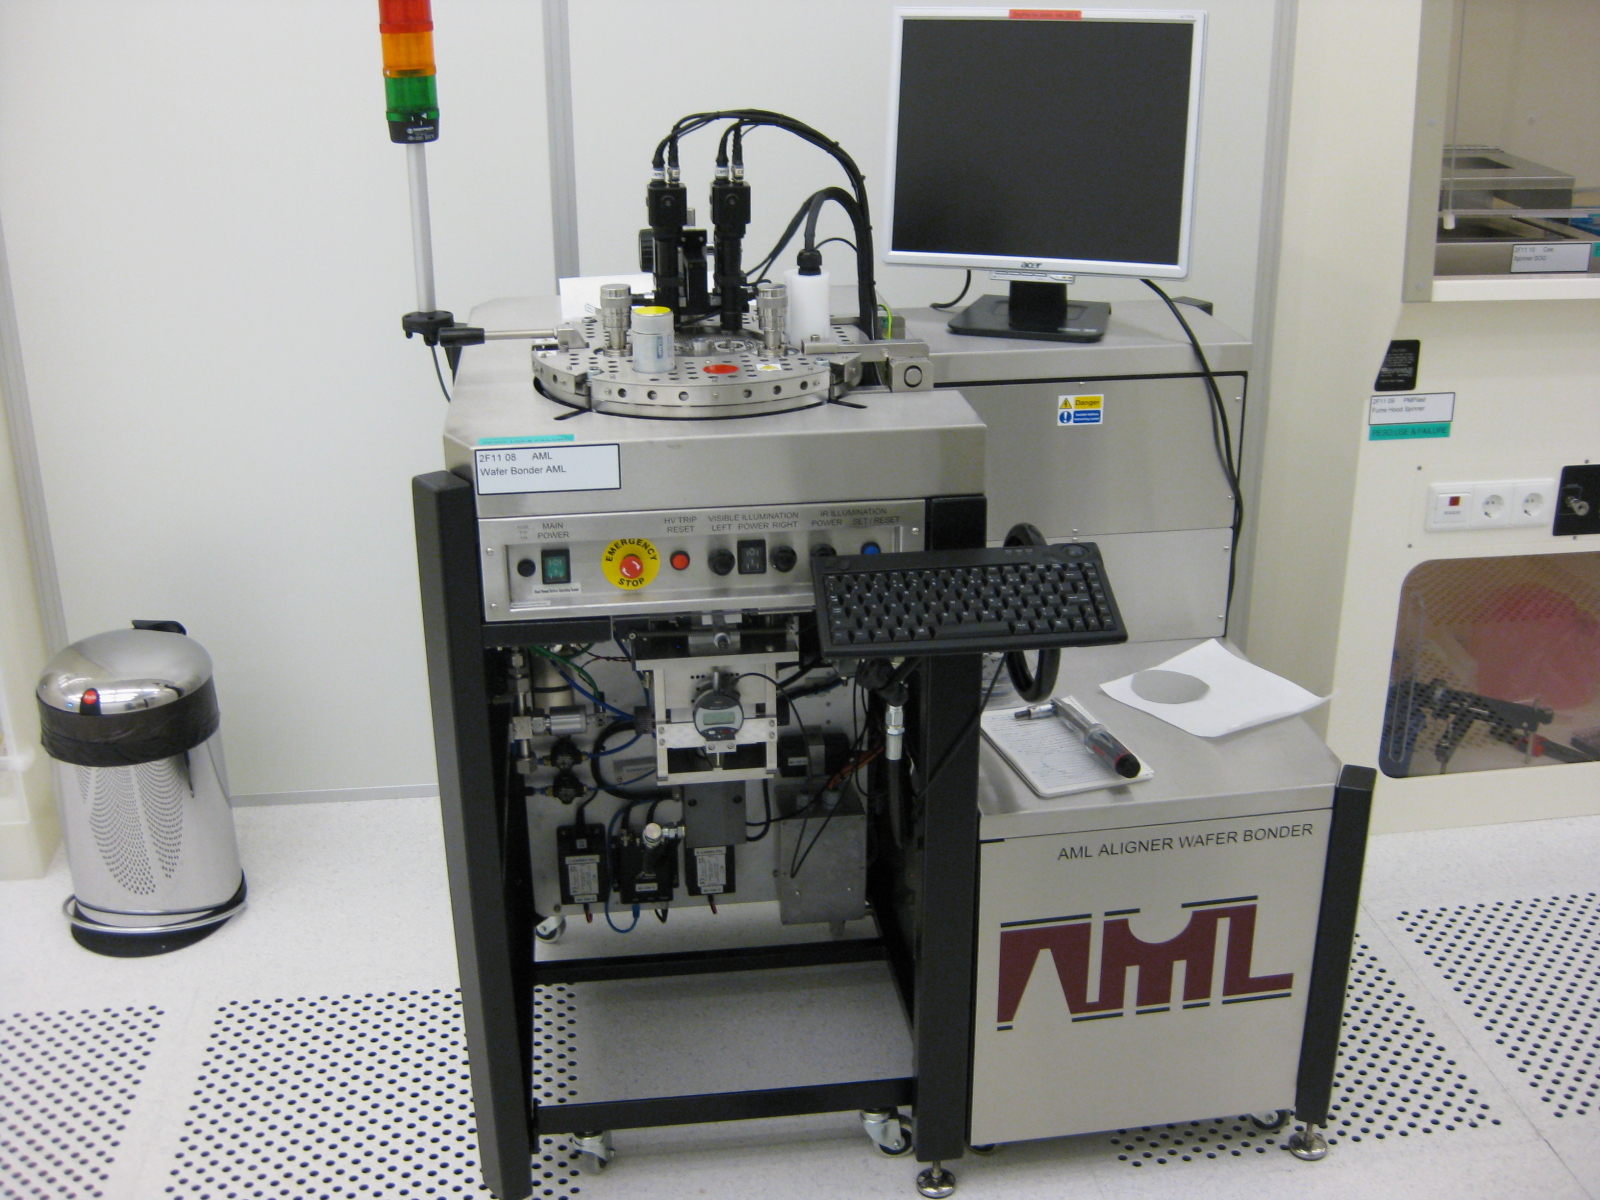 Picture of Wafer Bonder AML